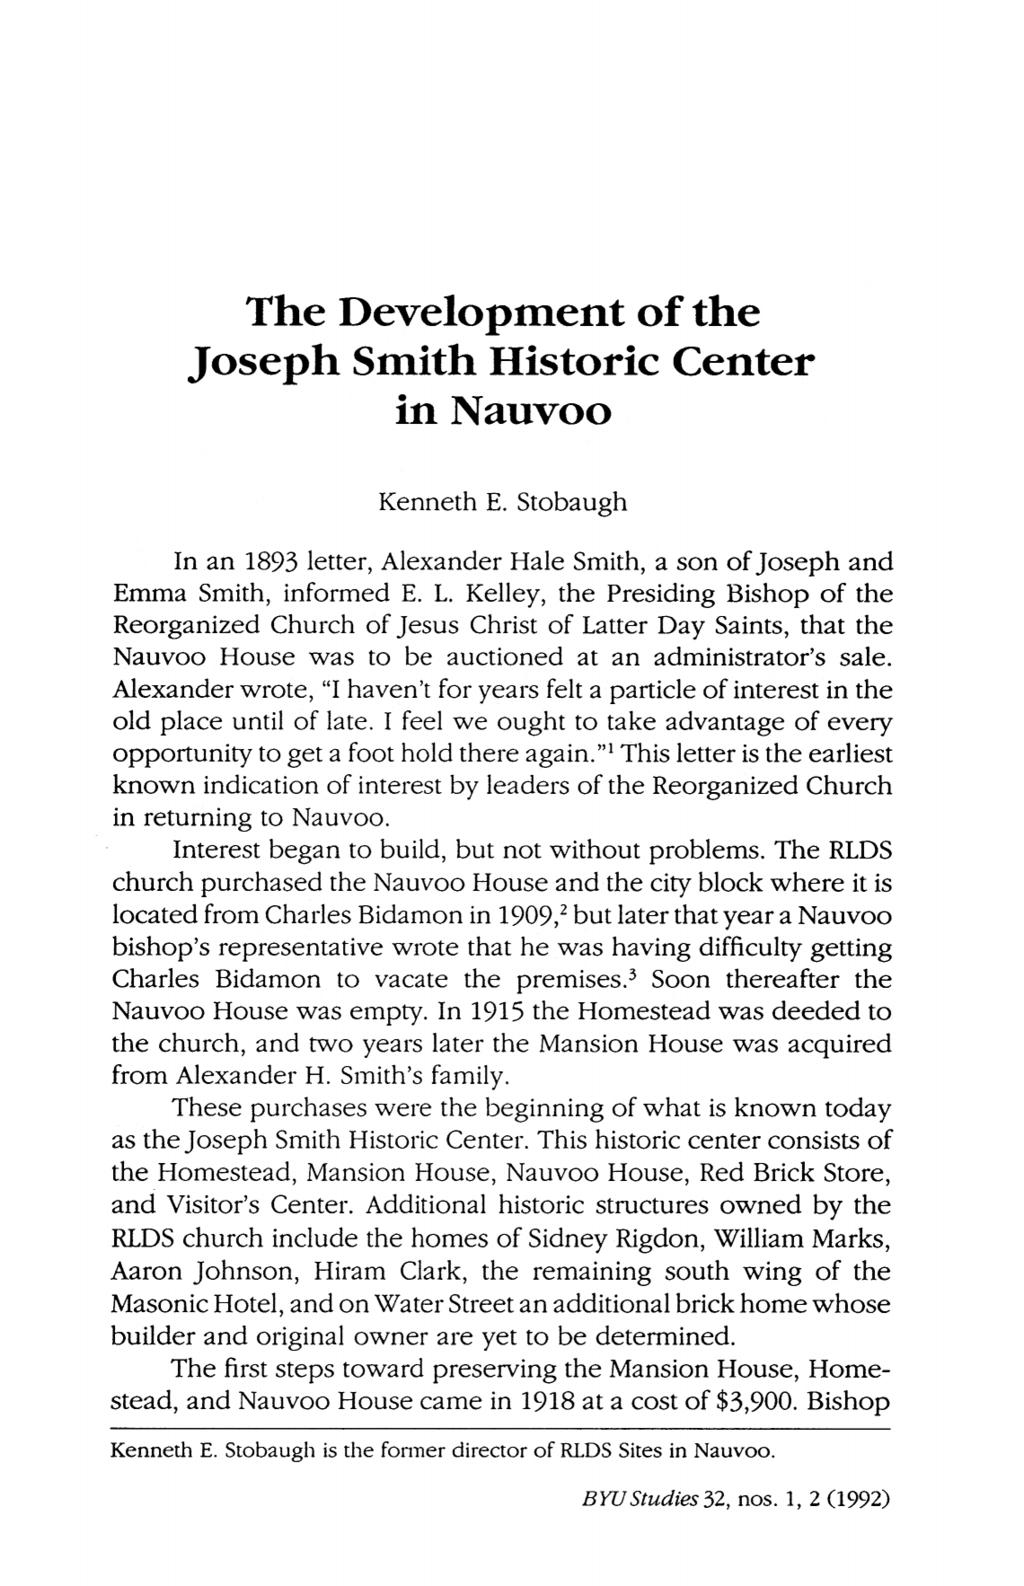 the development of the joseph smith historic center in nauvoo kenneth E stobaugh in an 1893 letter alexander hale smith a son of joseph and emma smith informed E L kelley the presiding bishop of the